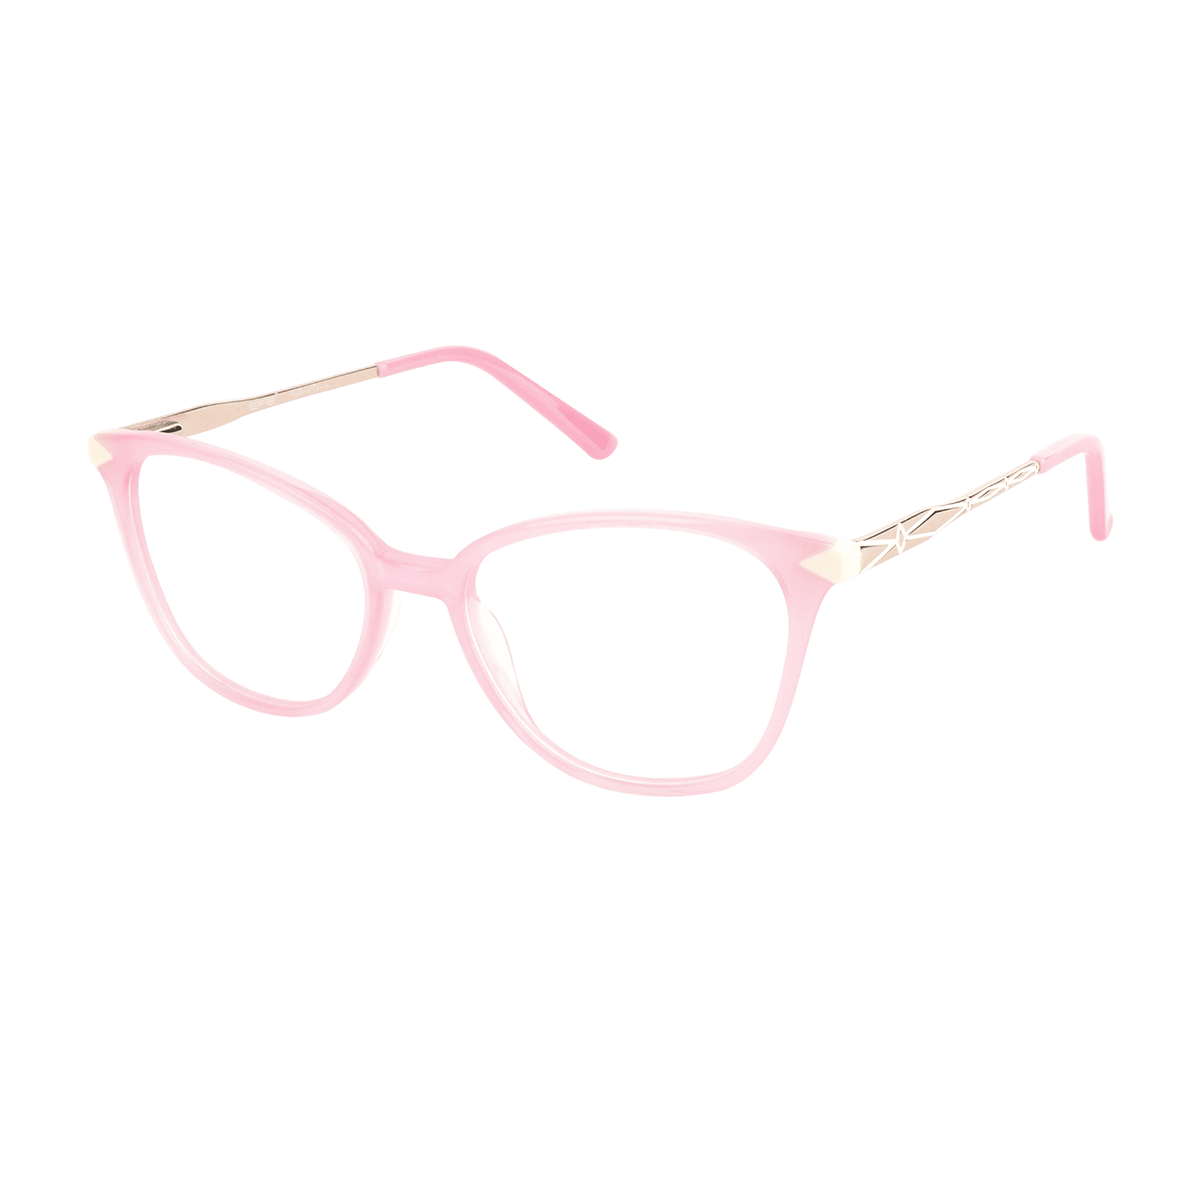 Asteria - Square Pink Reading Glasses for Women